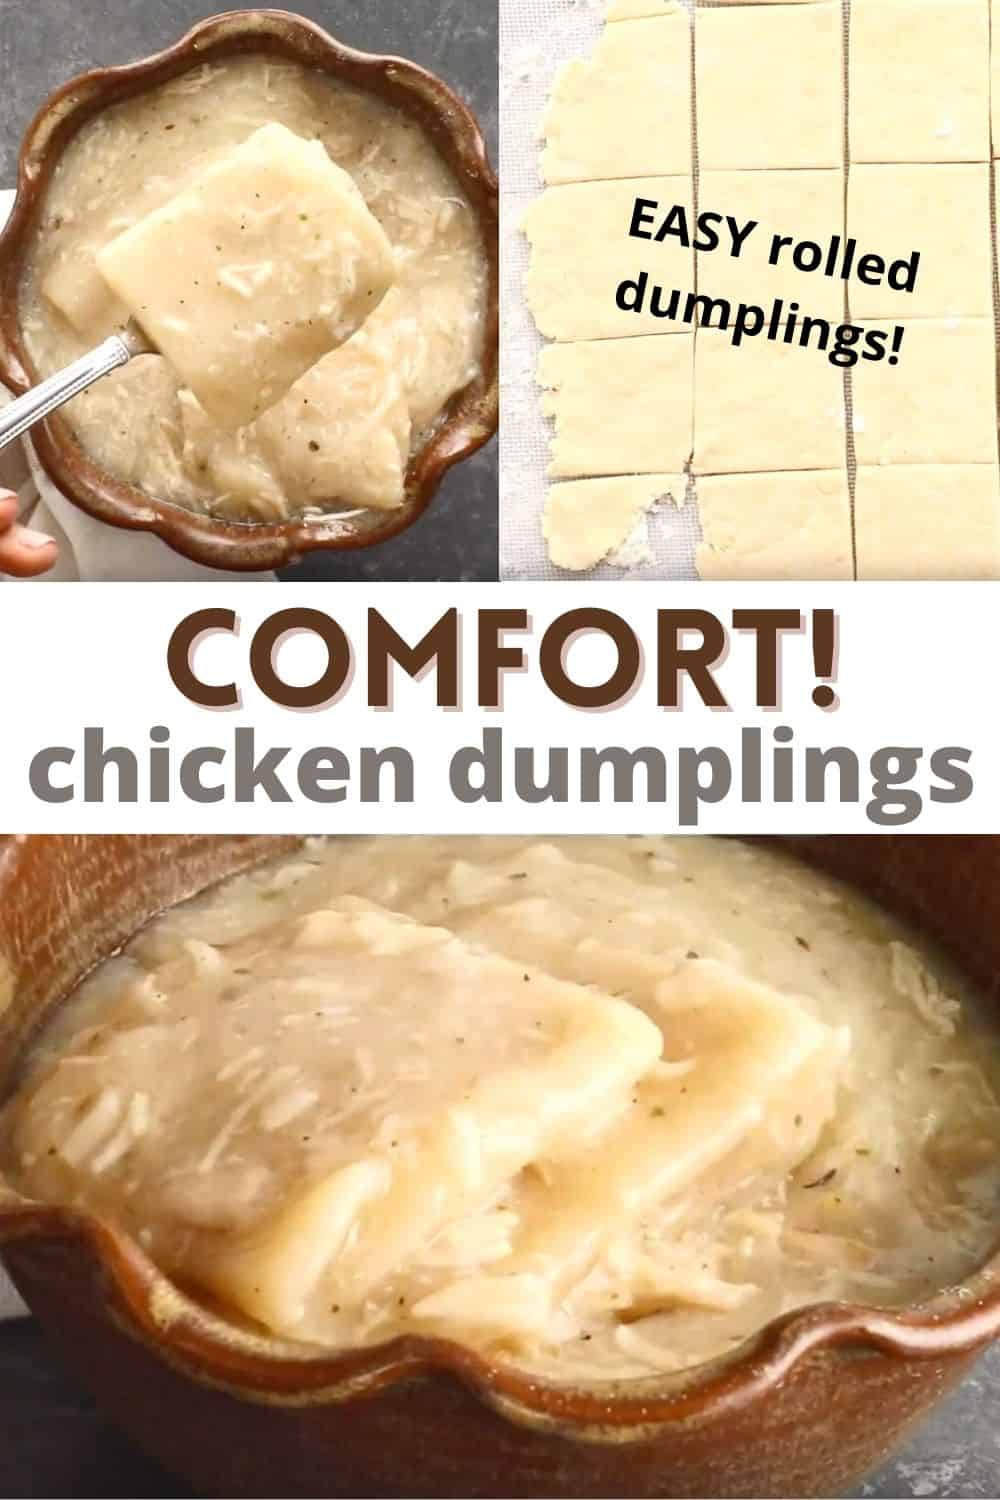 This chicken and dumplings recipe is straight from a southern granny's kitchen. Easy homemade flat dumplings and the delicious creamy chicken soup make this the ultimate comfort food!